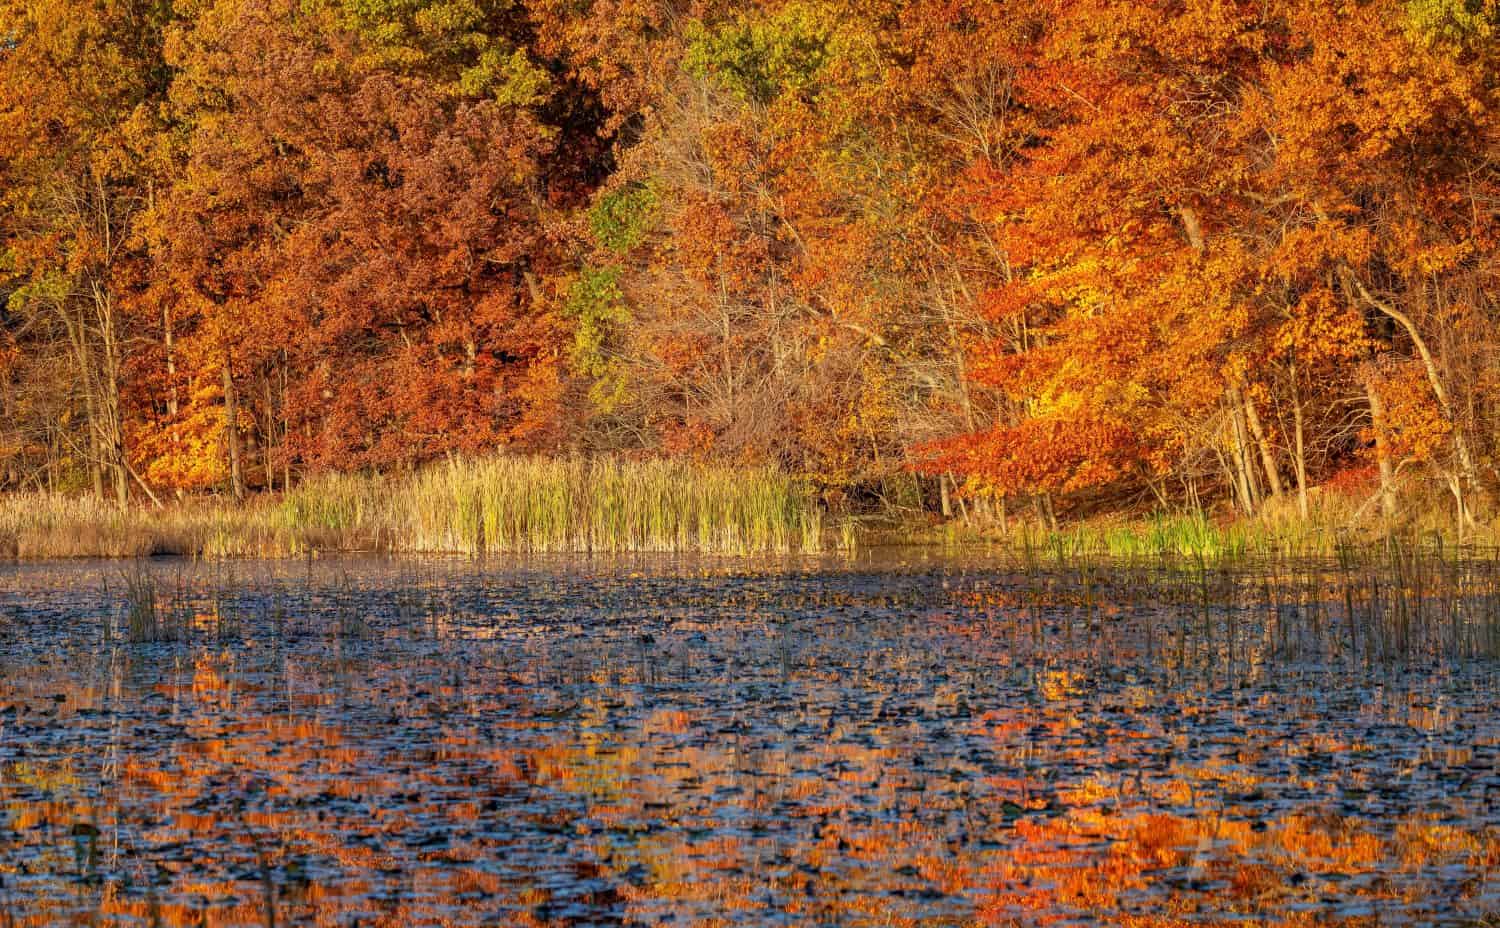 Colorful autumn trees by the lake shore in Kensington metro park, Michigan.